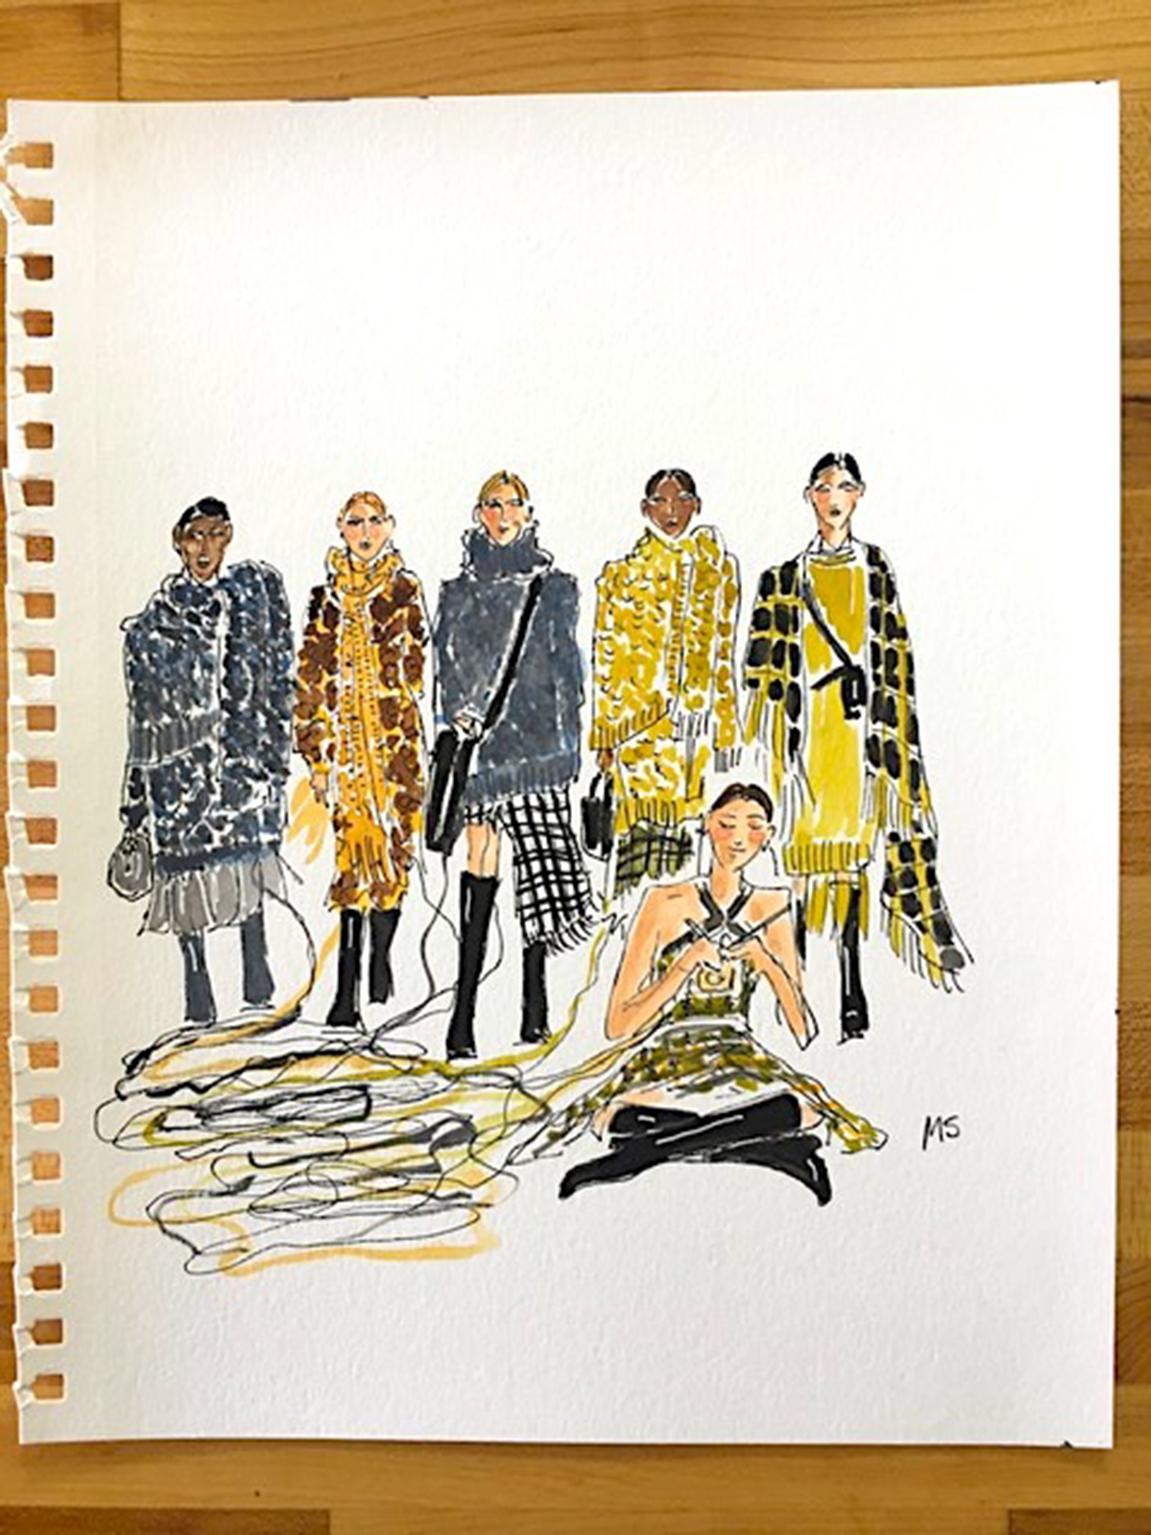 Michael Kors fall, Fashion show 2020. Watercolor fashion drawing on paper - Art by Manuel Santelices